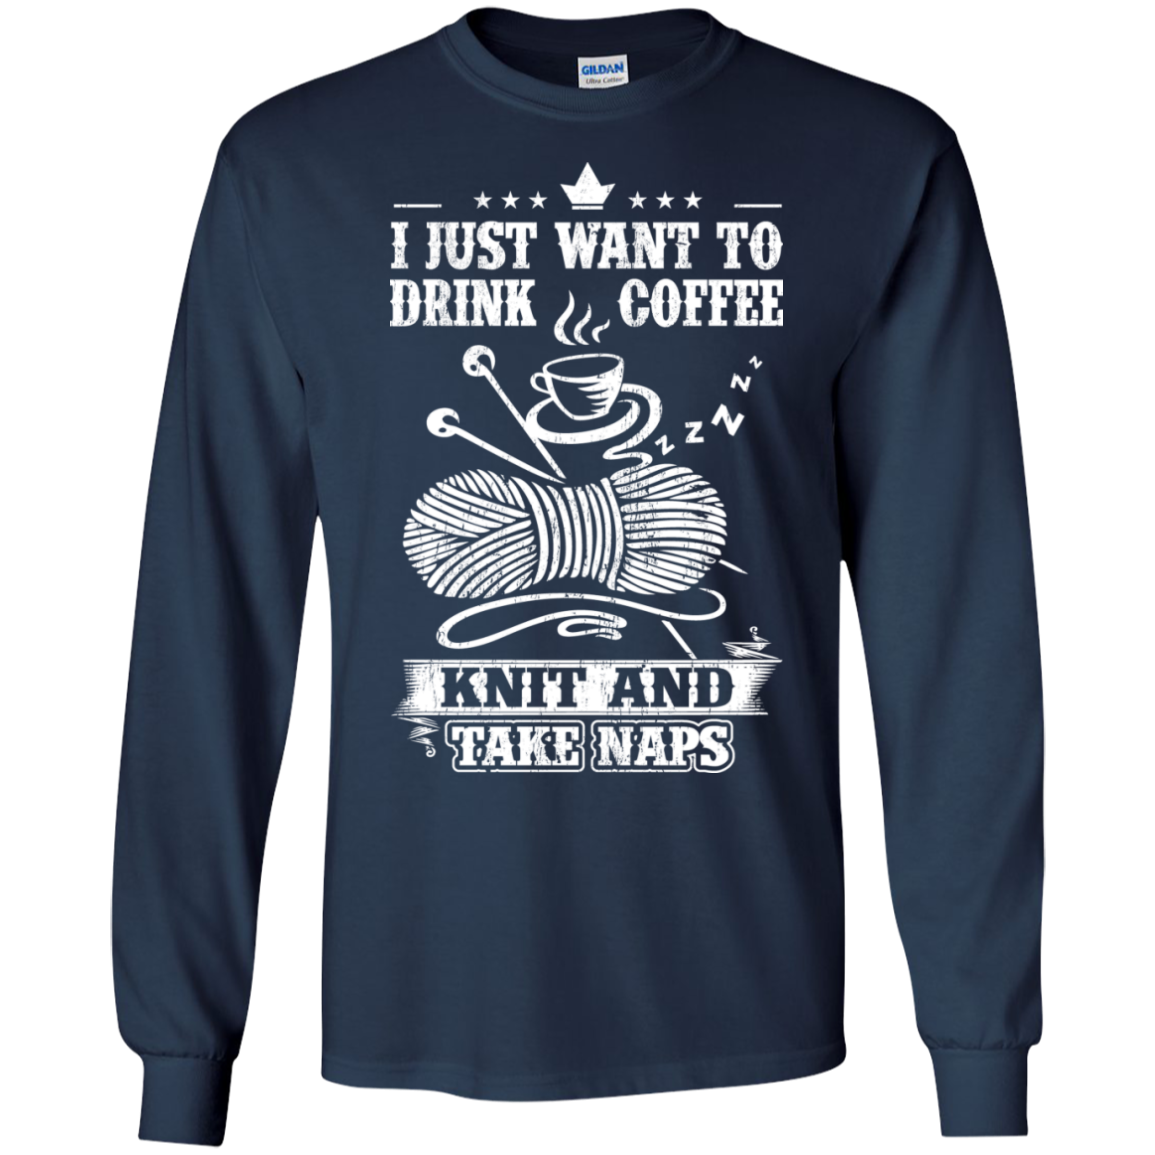 Coffee-Knit-Nap Long Sleeve Ultra Cotton T-Shirt - Crafter4Life - 11